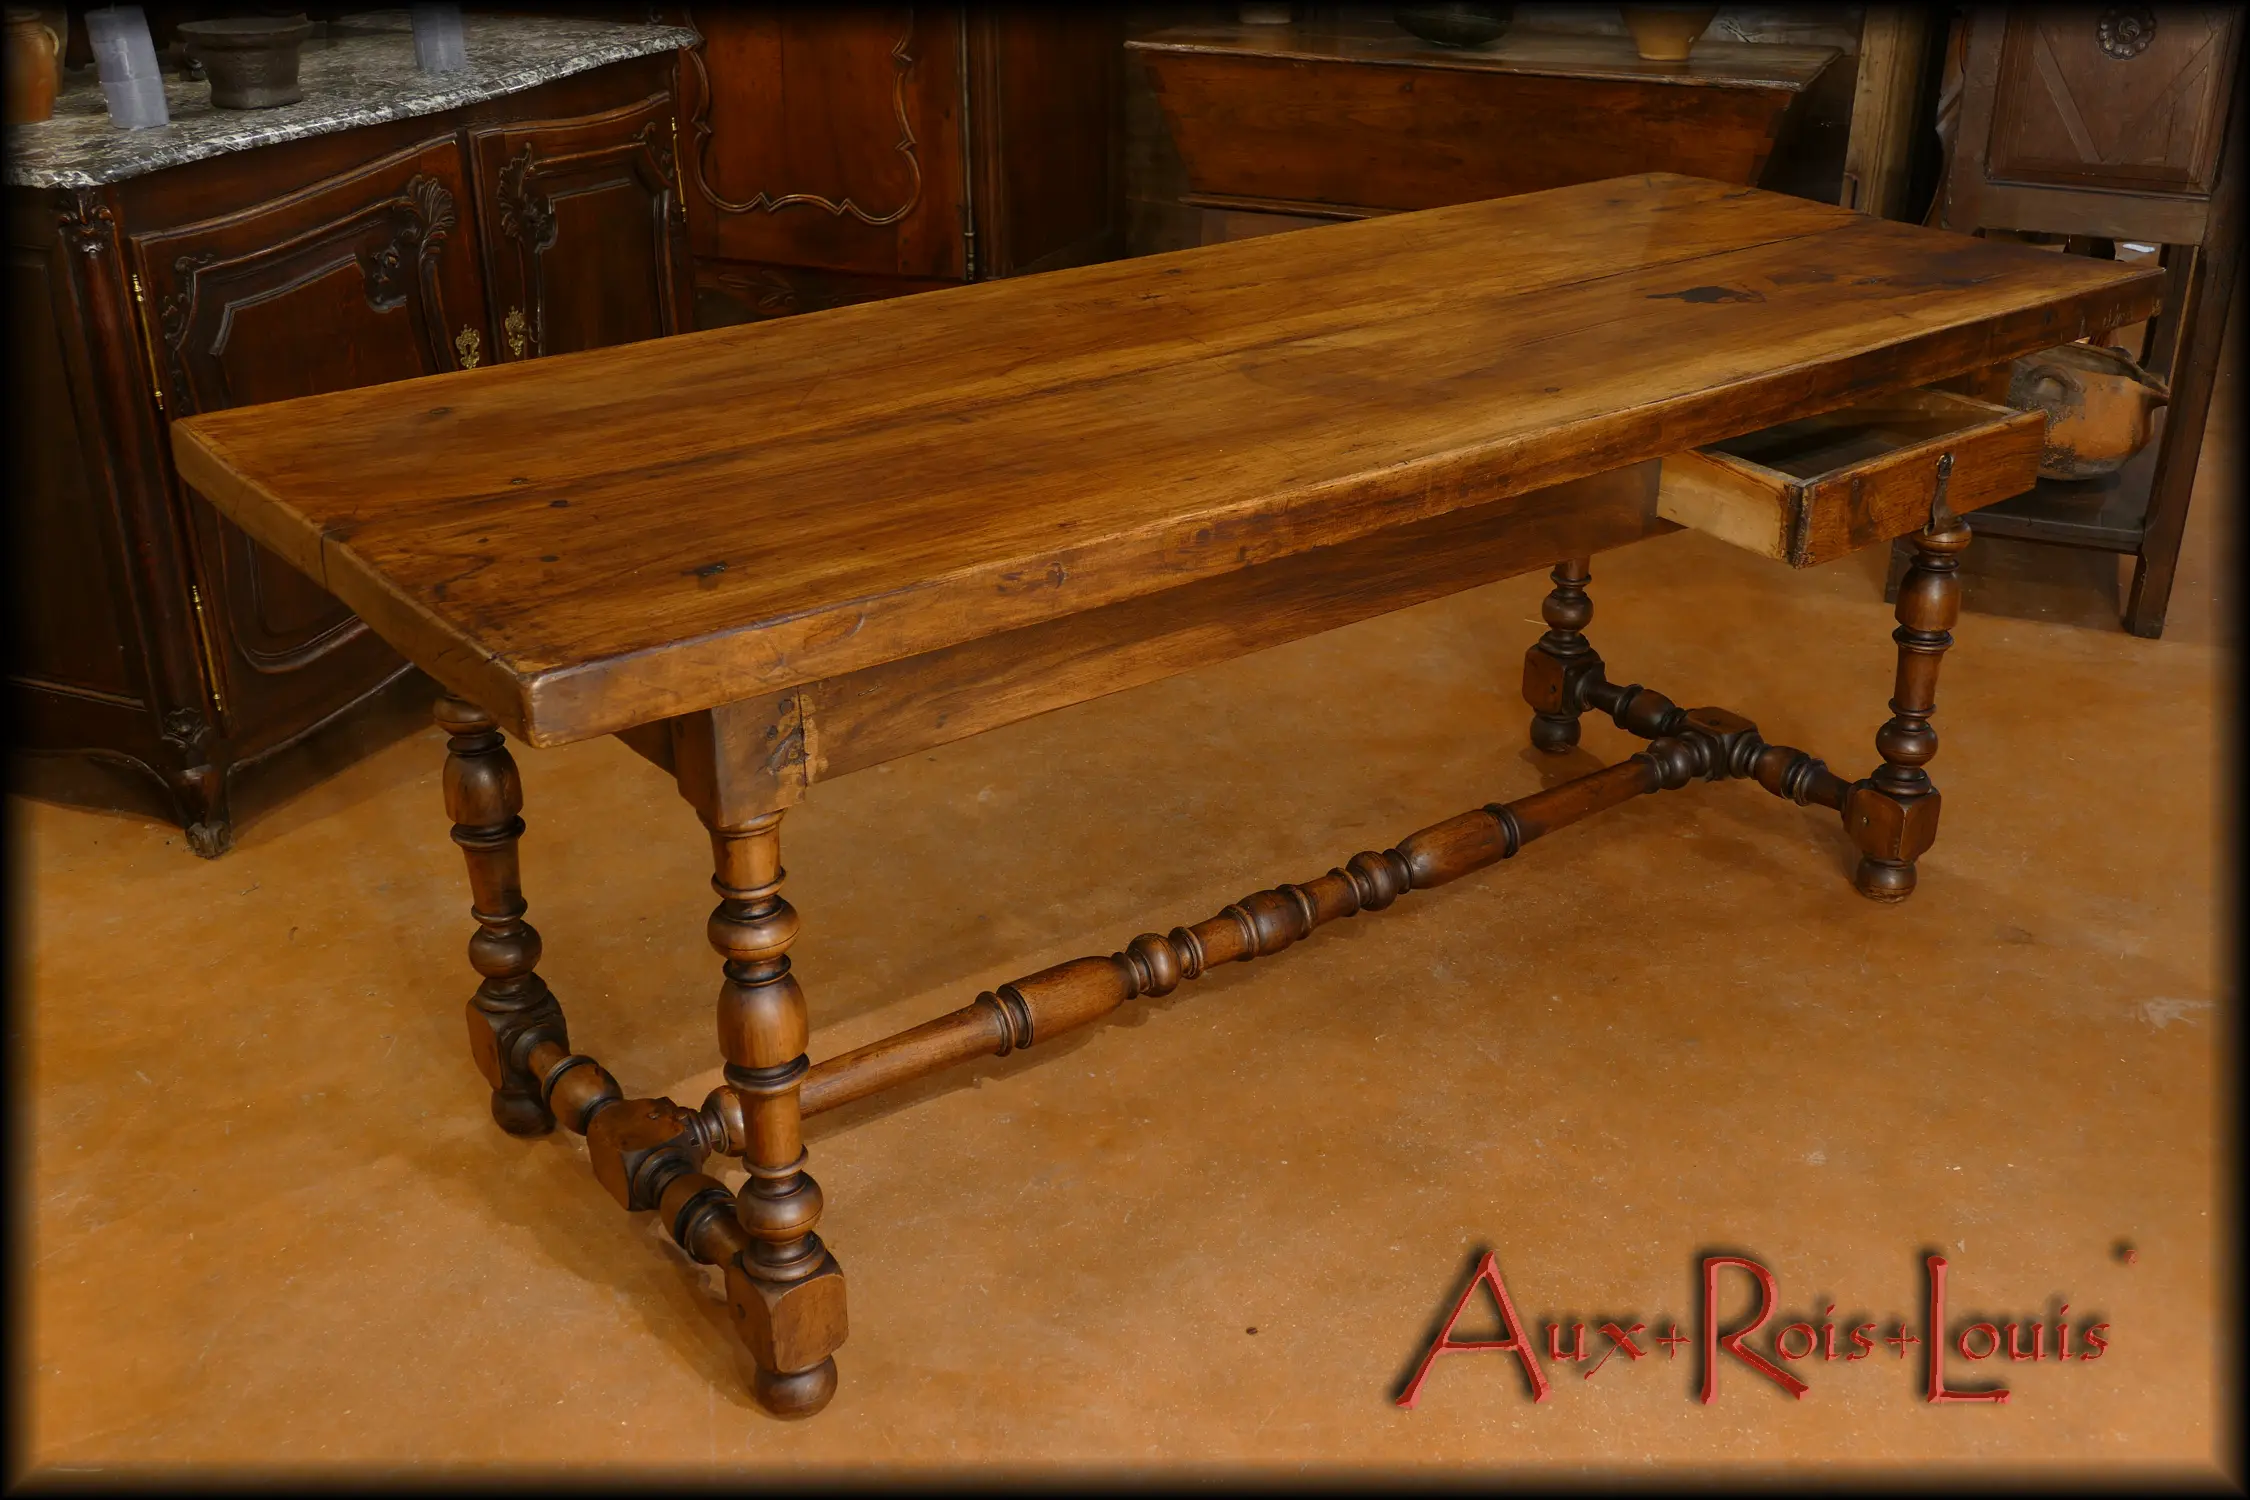 This Louis XIII style oak table has a small side drawer for cutlery.